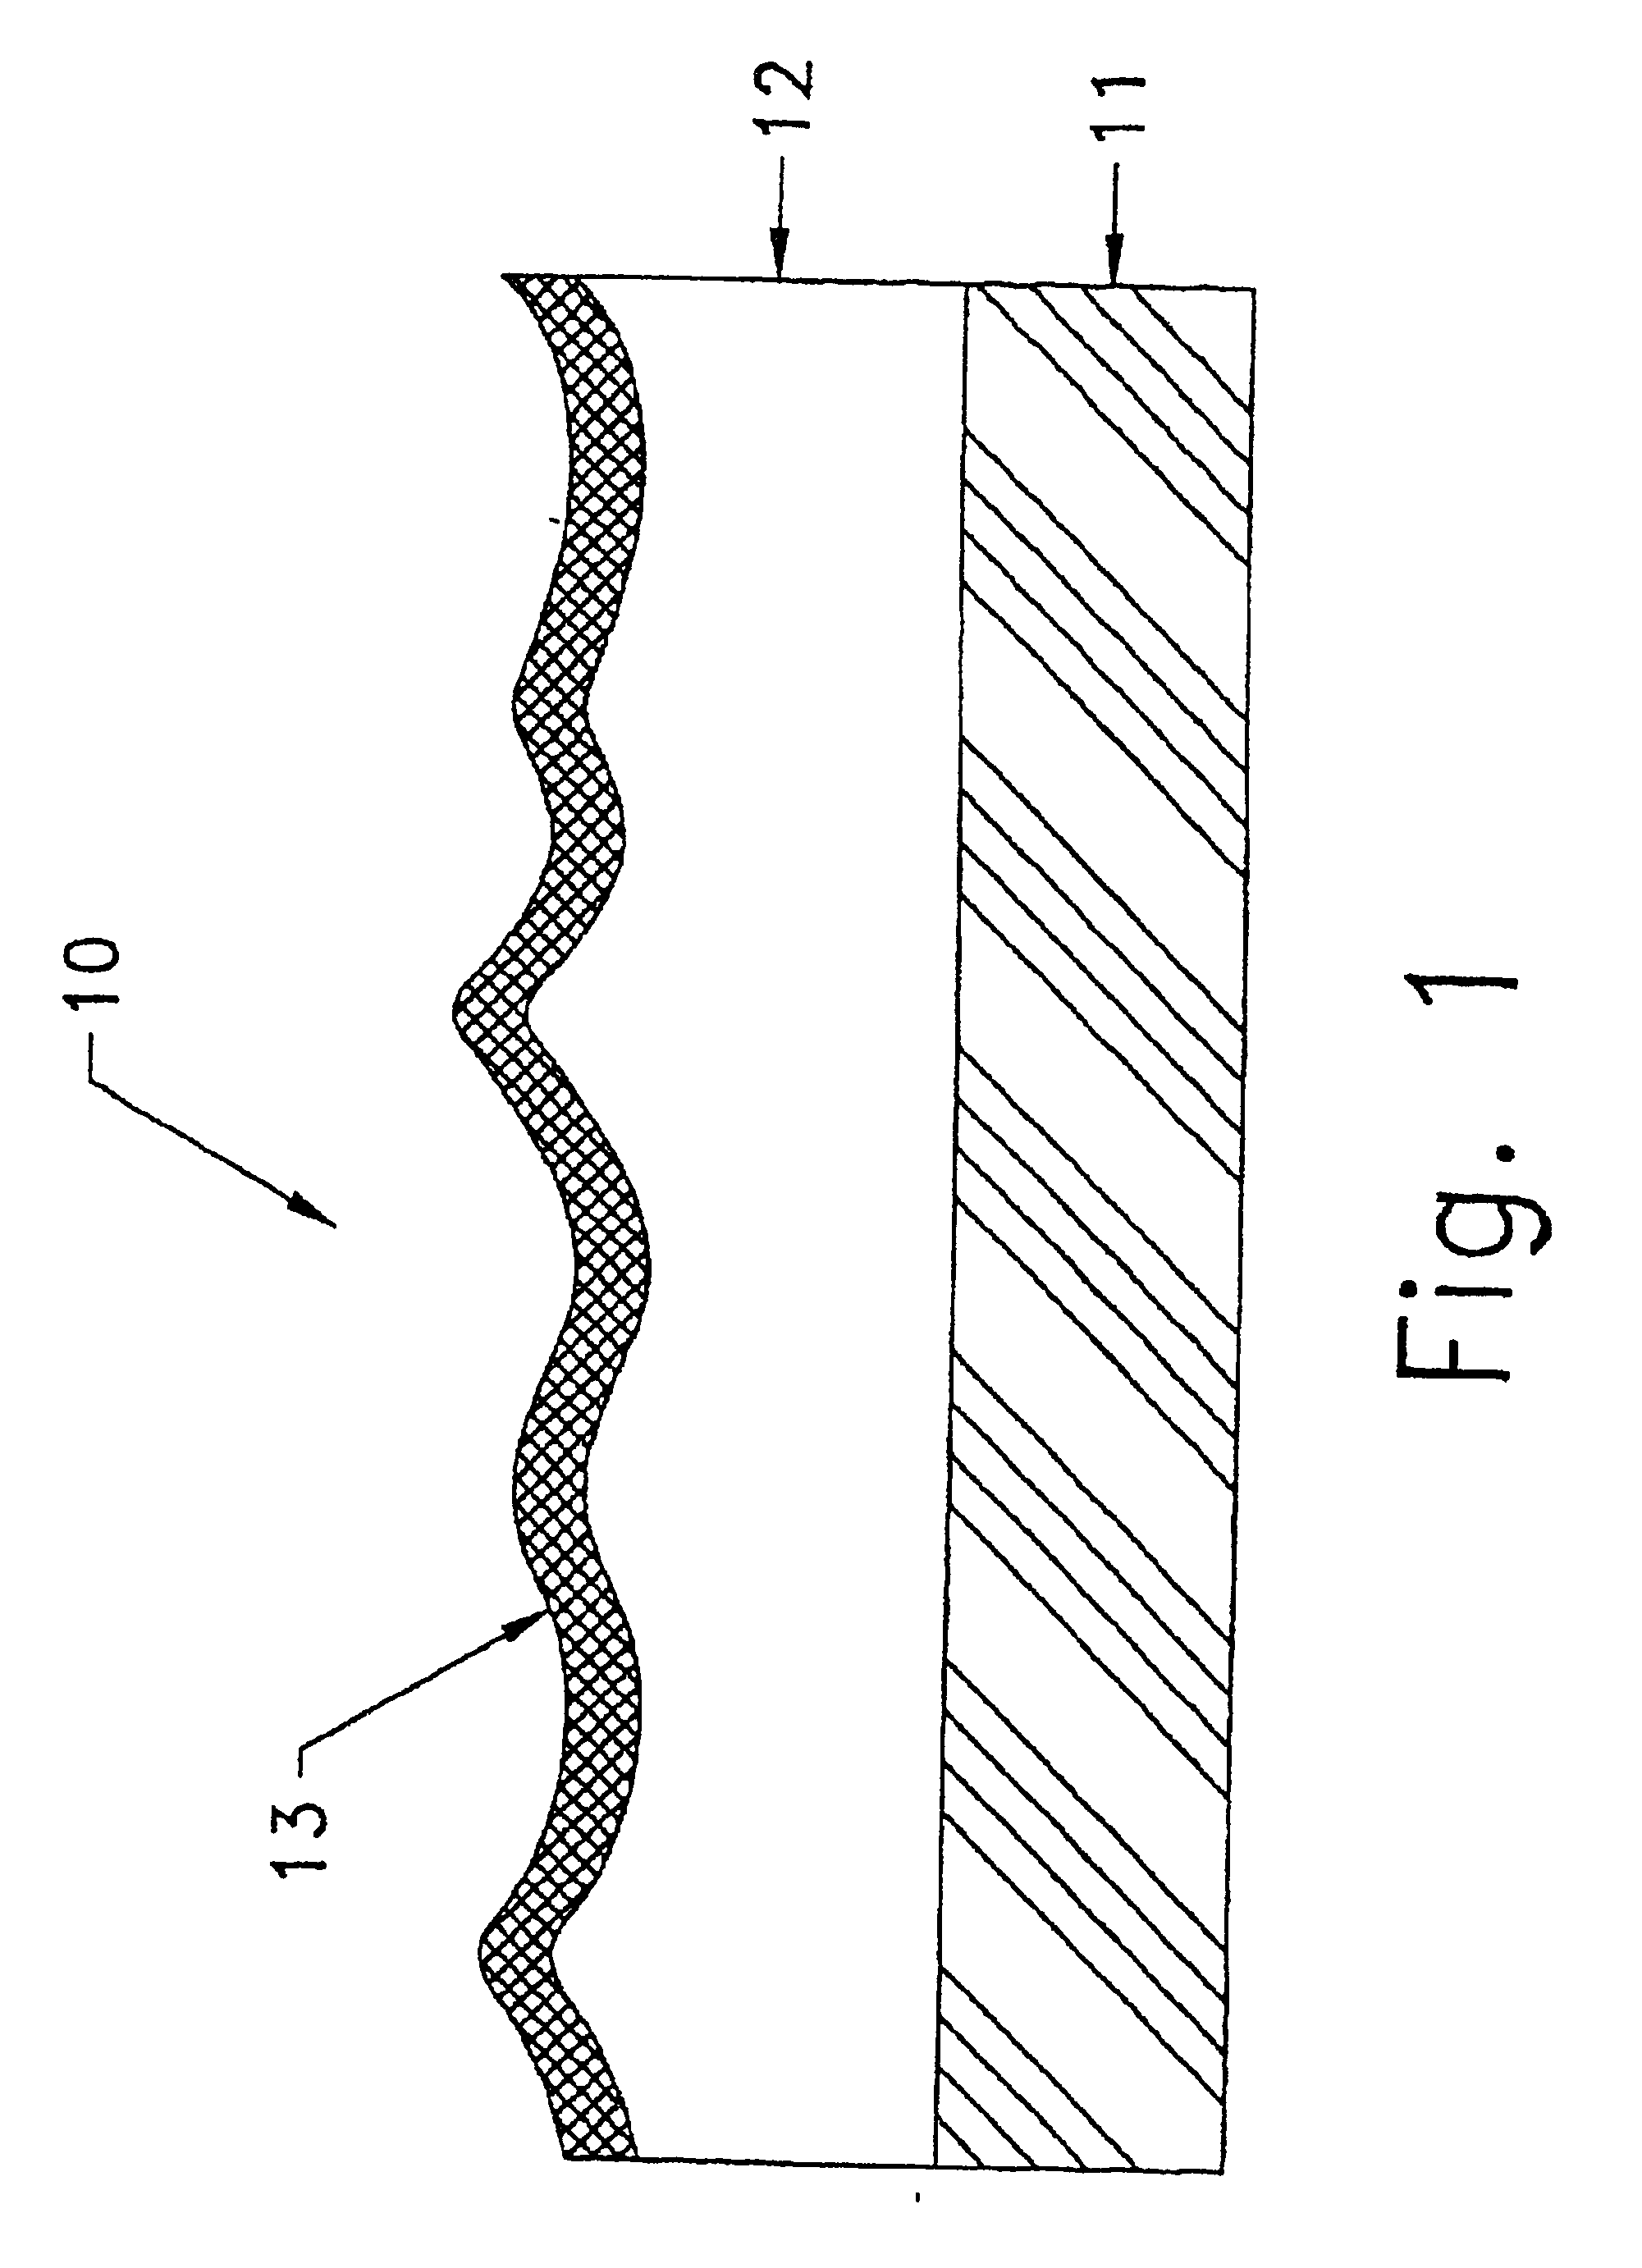 Method of manufacturing a release sheet for use with multicomponent reactive urethane systems